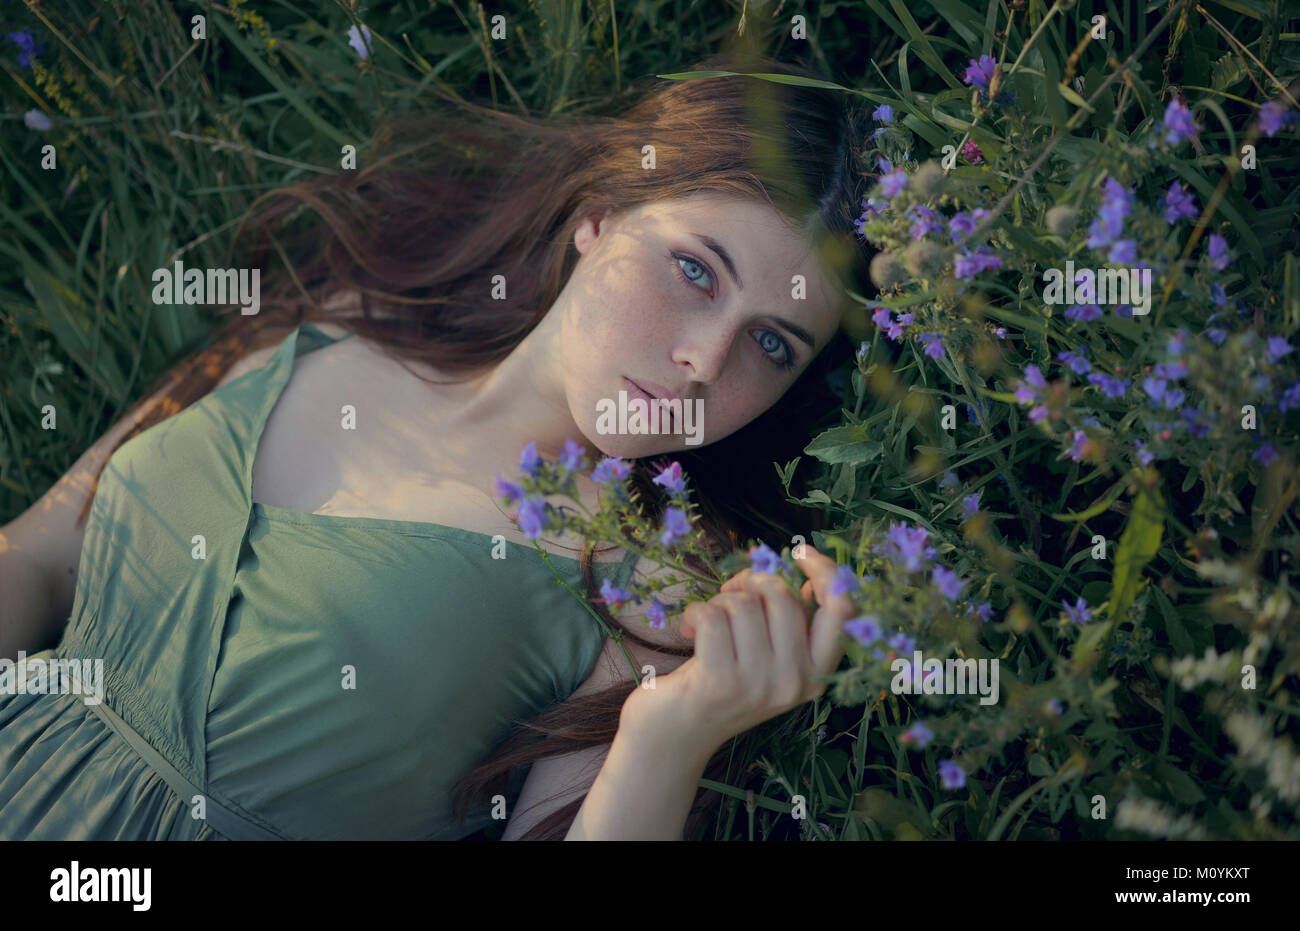 Caucasian woman laying in grass with wildflowers Stock Photo